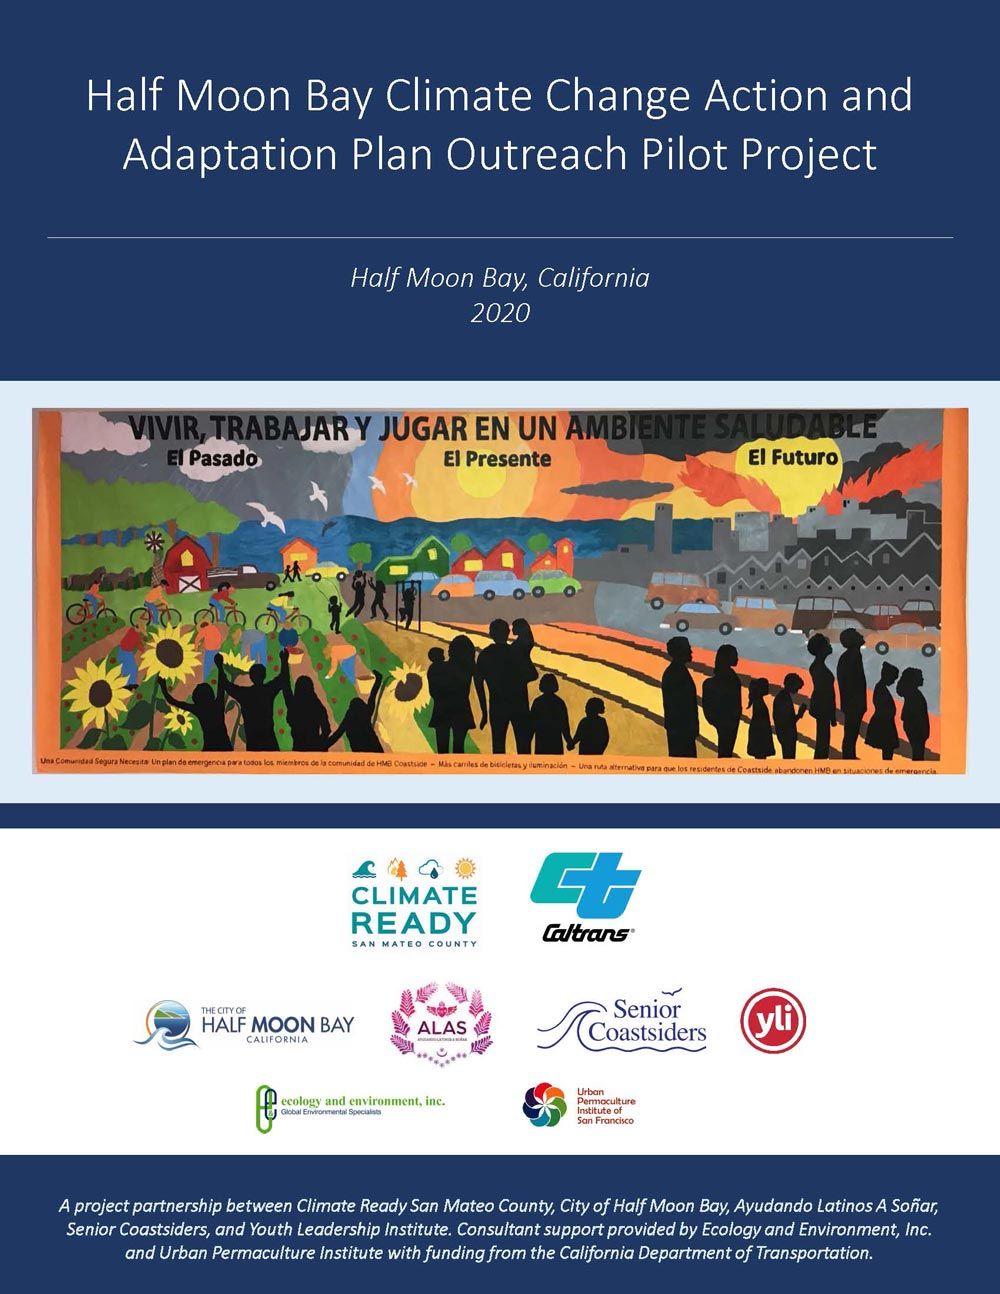 Half Moon Bay Climate Change Action and Adaptation Plan Outreach Pilot Project, 2020